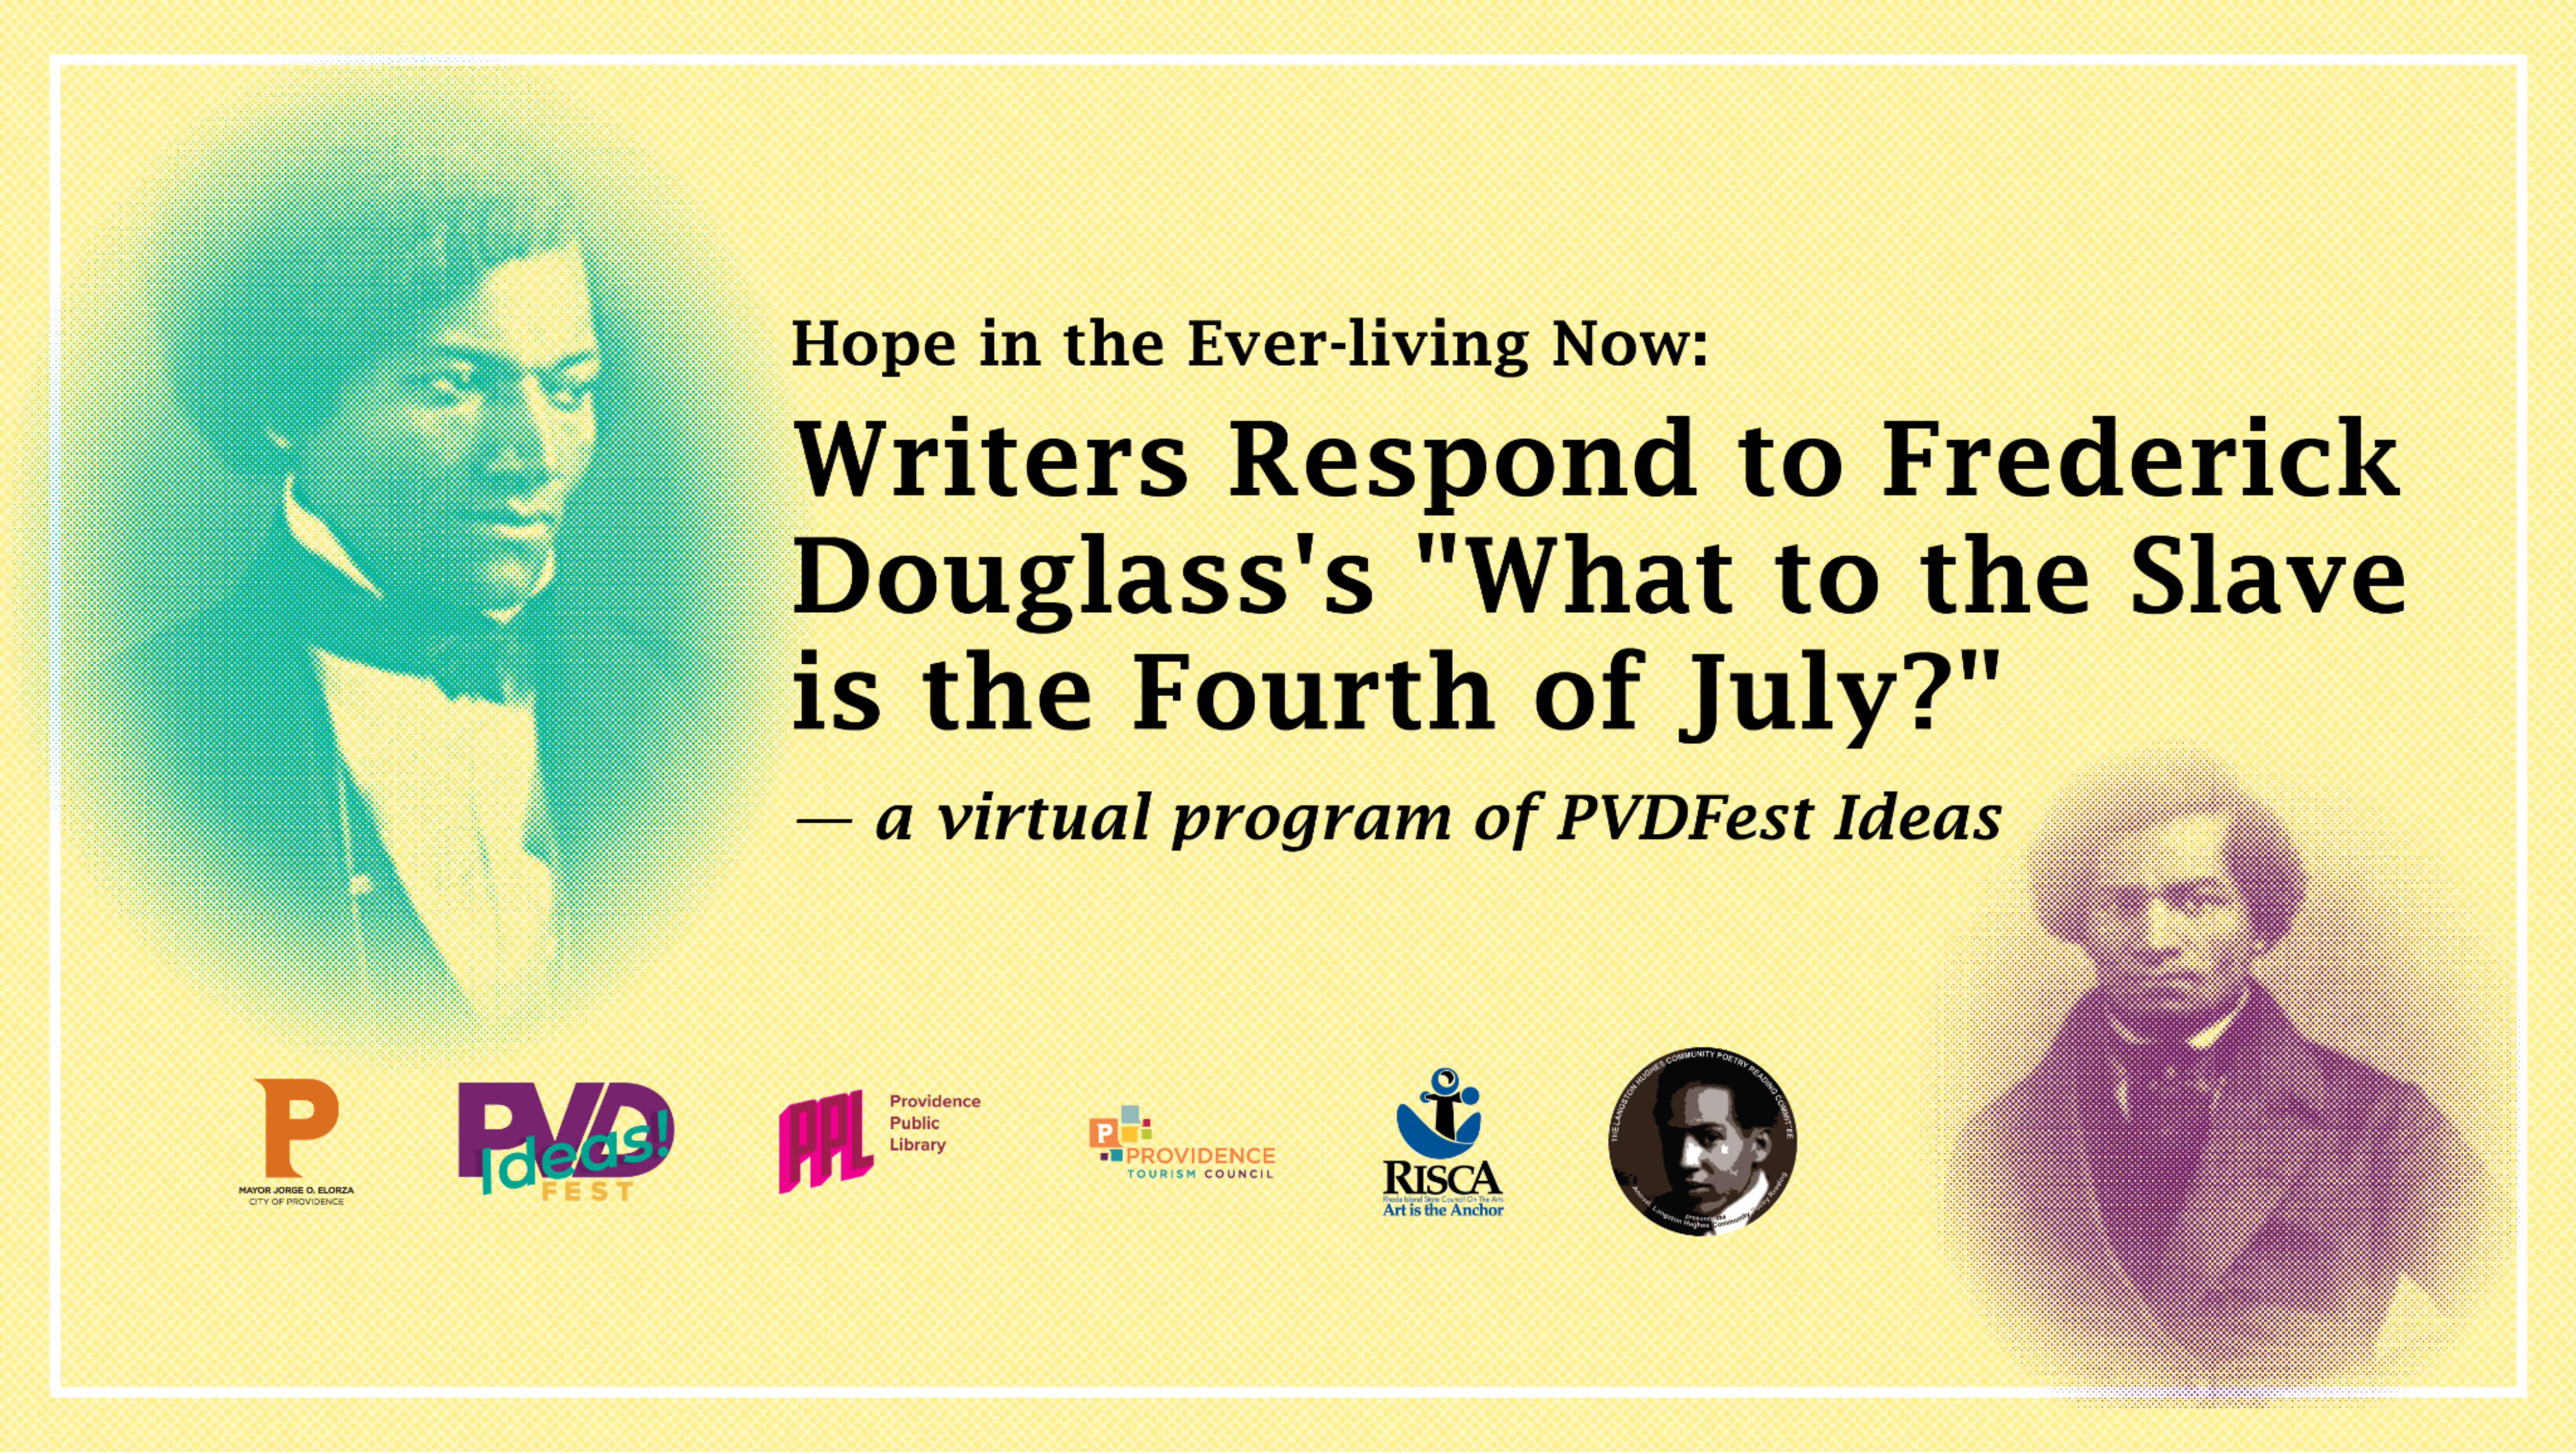 Image description: stylized portraits of Frederick Douglass with the logos of PVDFest, Providence Public Library, Providence Tourism, Rhode Island State Council for the Arts, and Langston Hughes Community Poetry Reading. Text reads: "Hope in the Ever-living Now: Writers Respond to Frederick Douglass’s “What to the Slave is the Fourth of July?” – a virtual program of PVDFest Ideas"